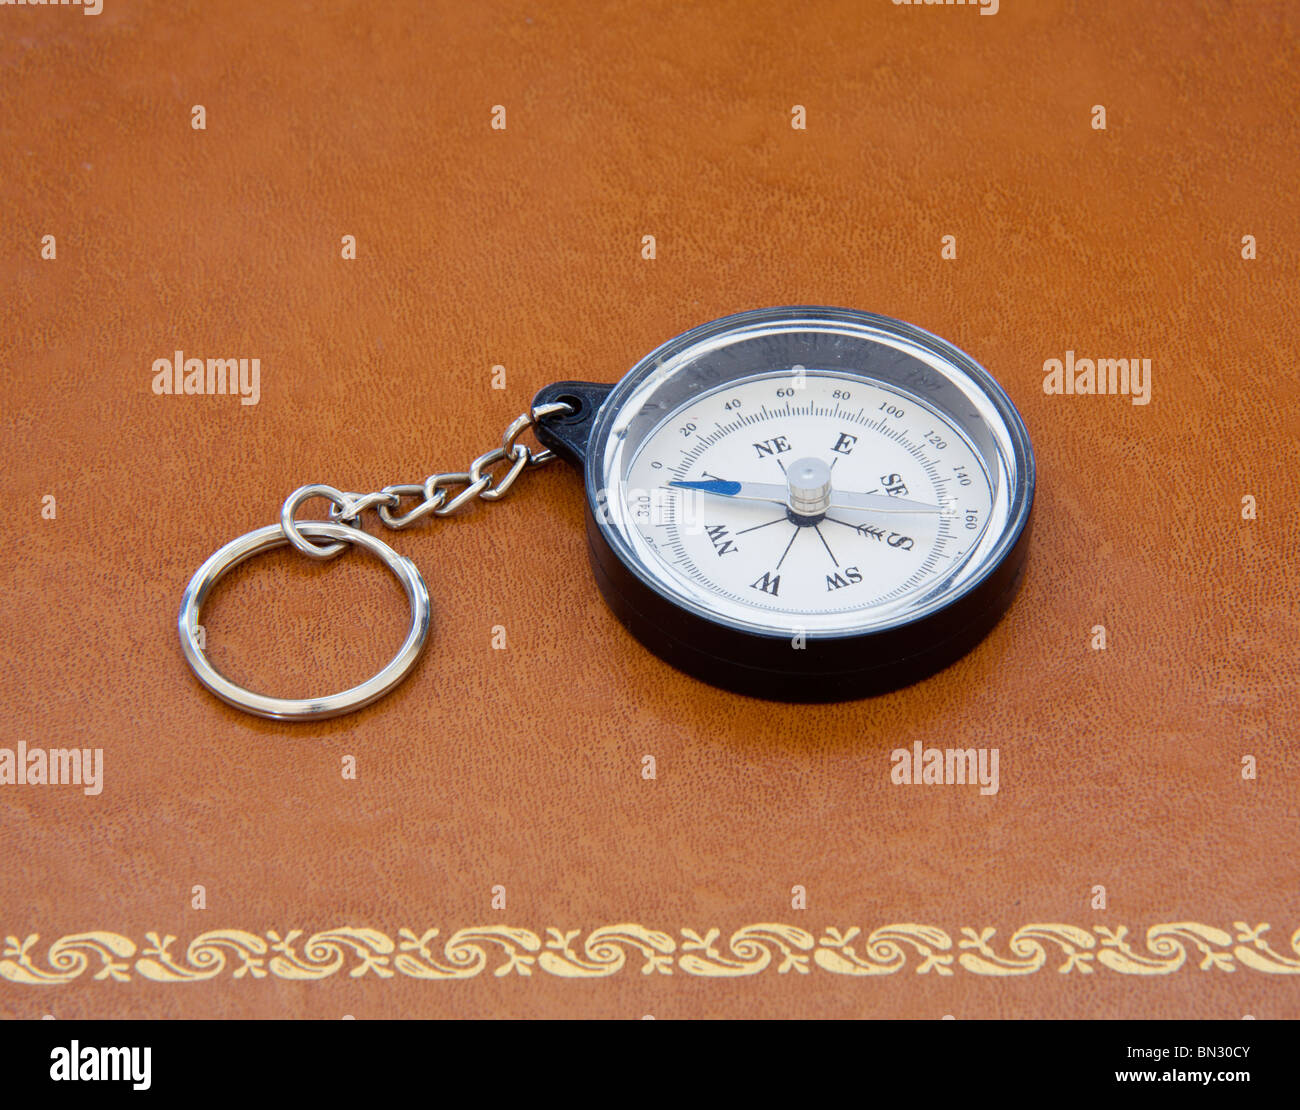 Compass on old leather desk Stock Photo